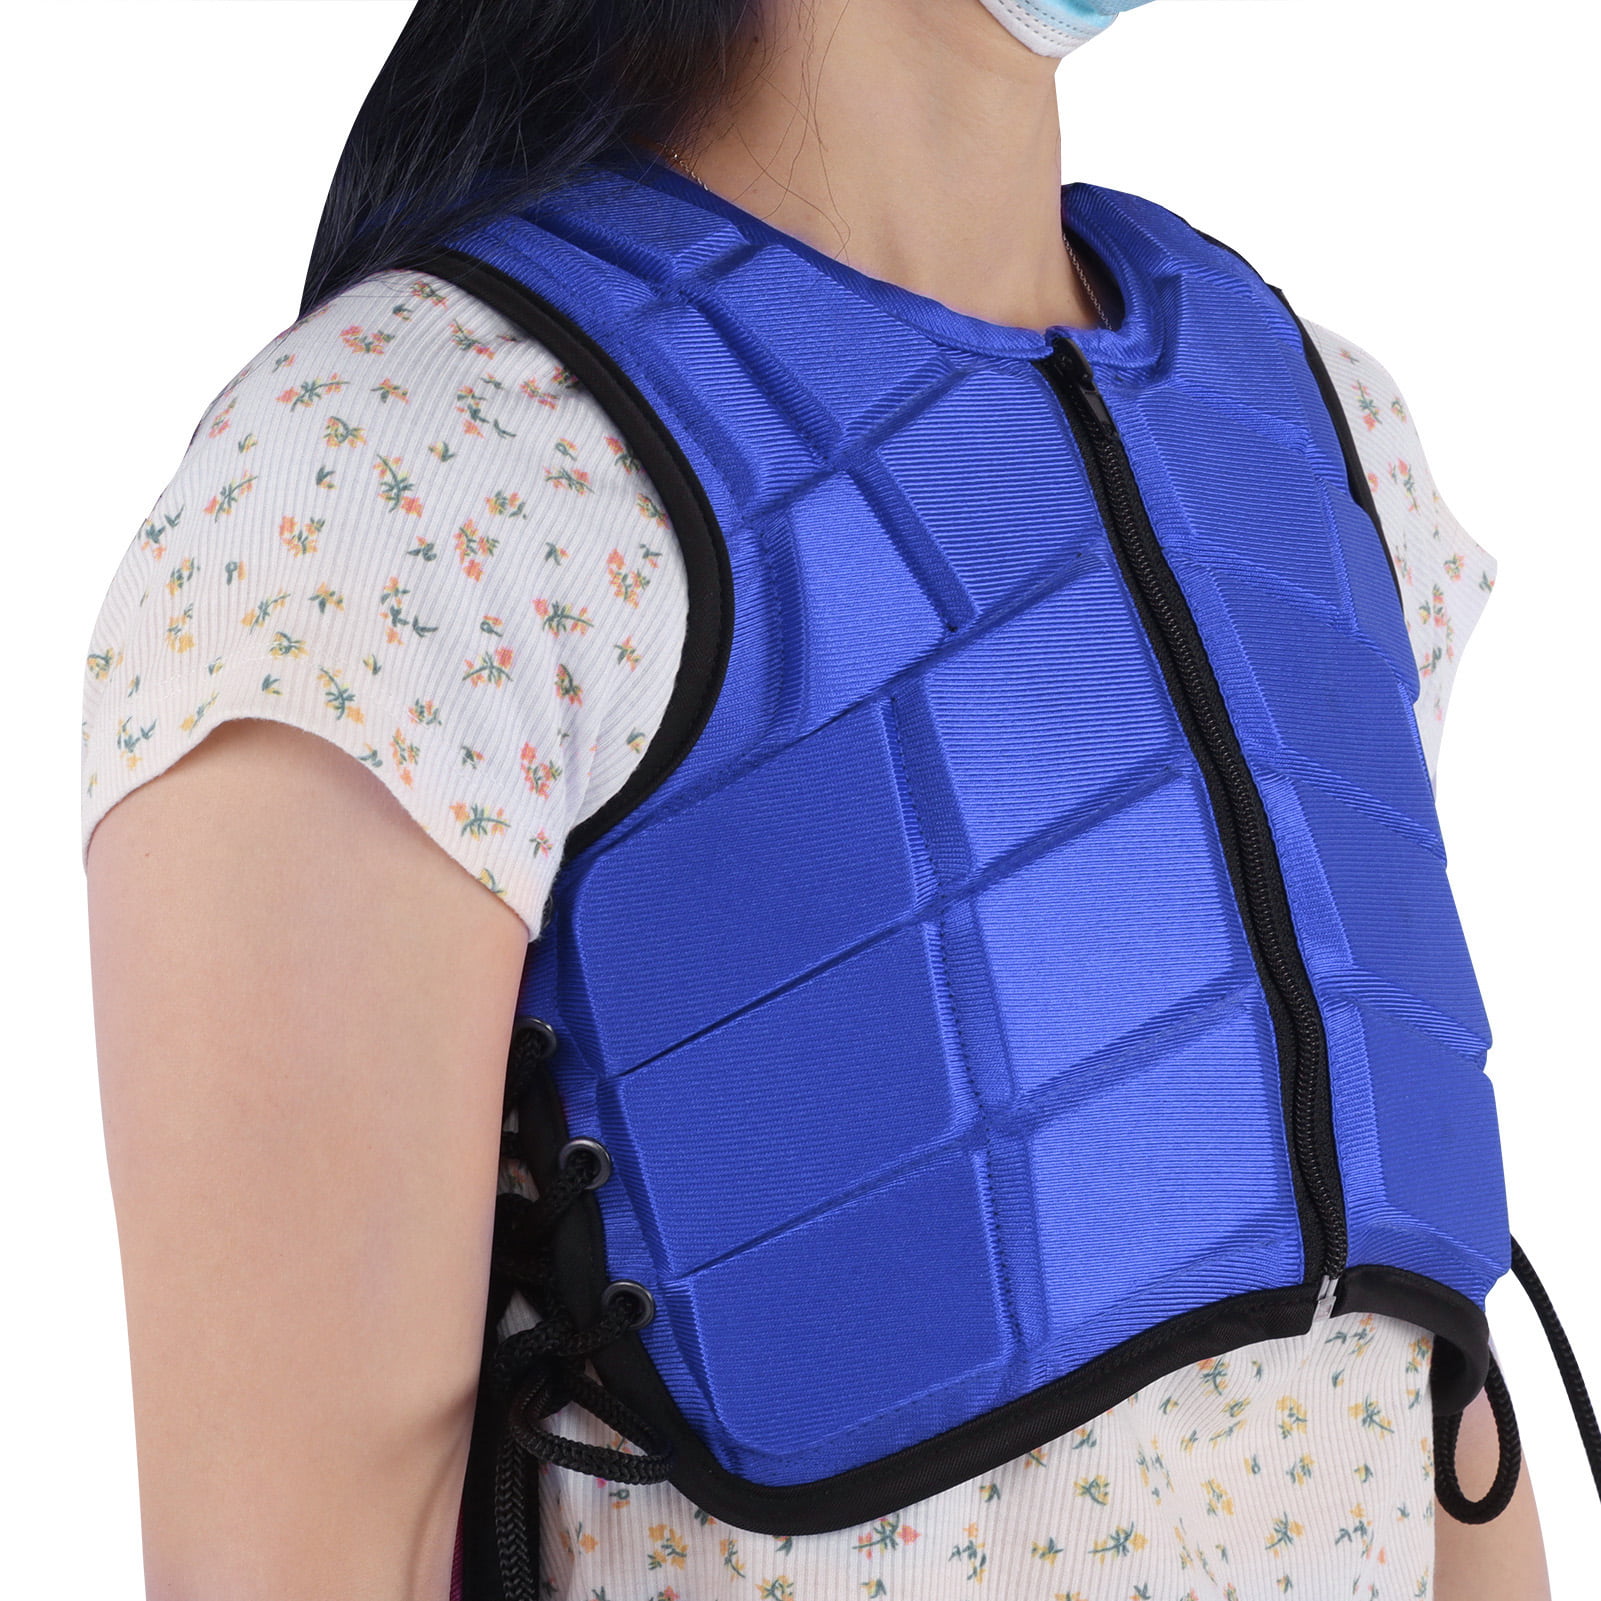 KIDS/CHILDREN Safety Equestrian Horse Riding Training Vest Protective Body Protector Gear Various size Zerone Horse Riding Vest 